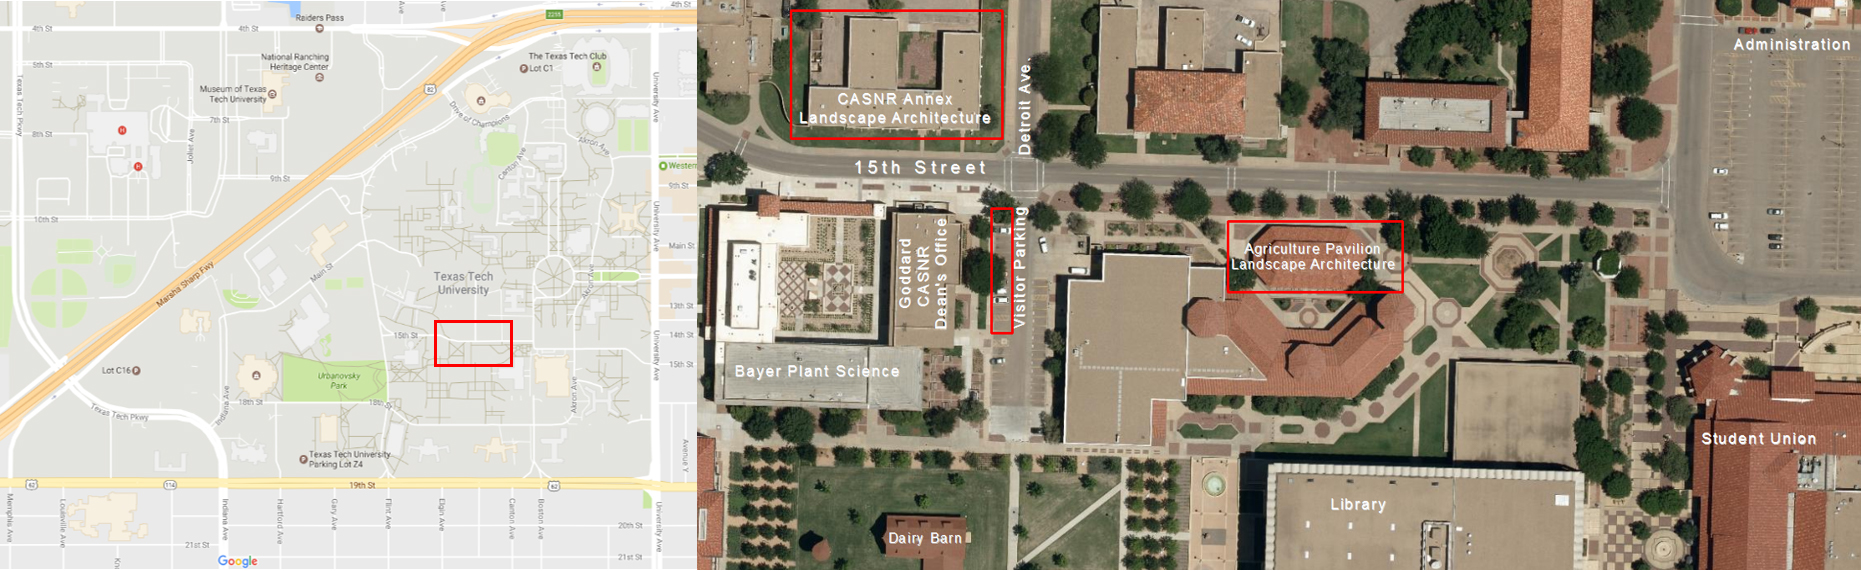 Map showing the location of the TTU Department of Landscape Architecture